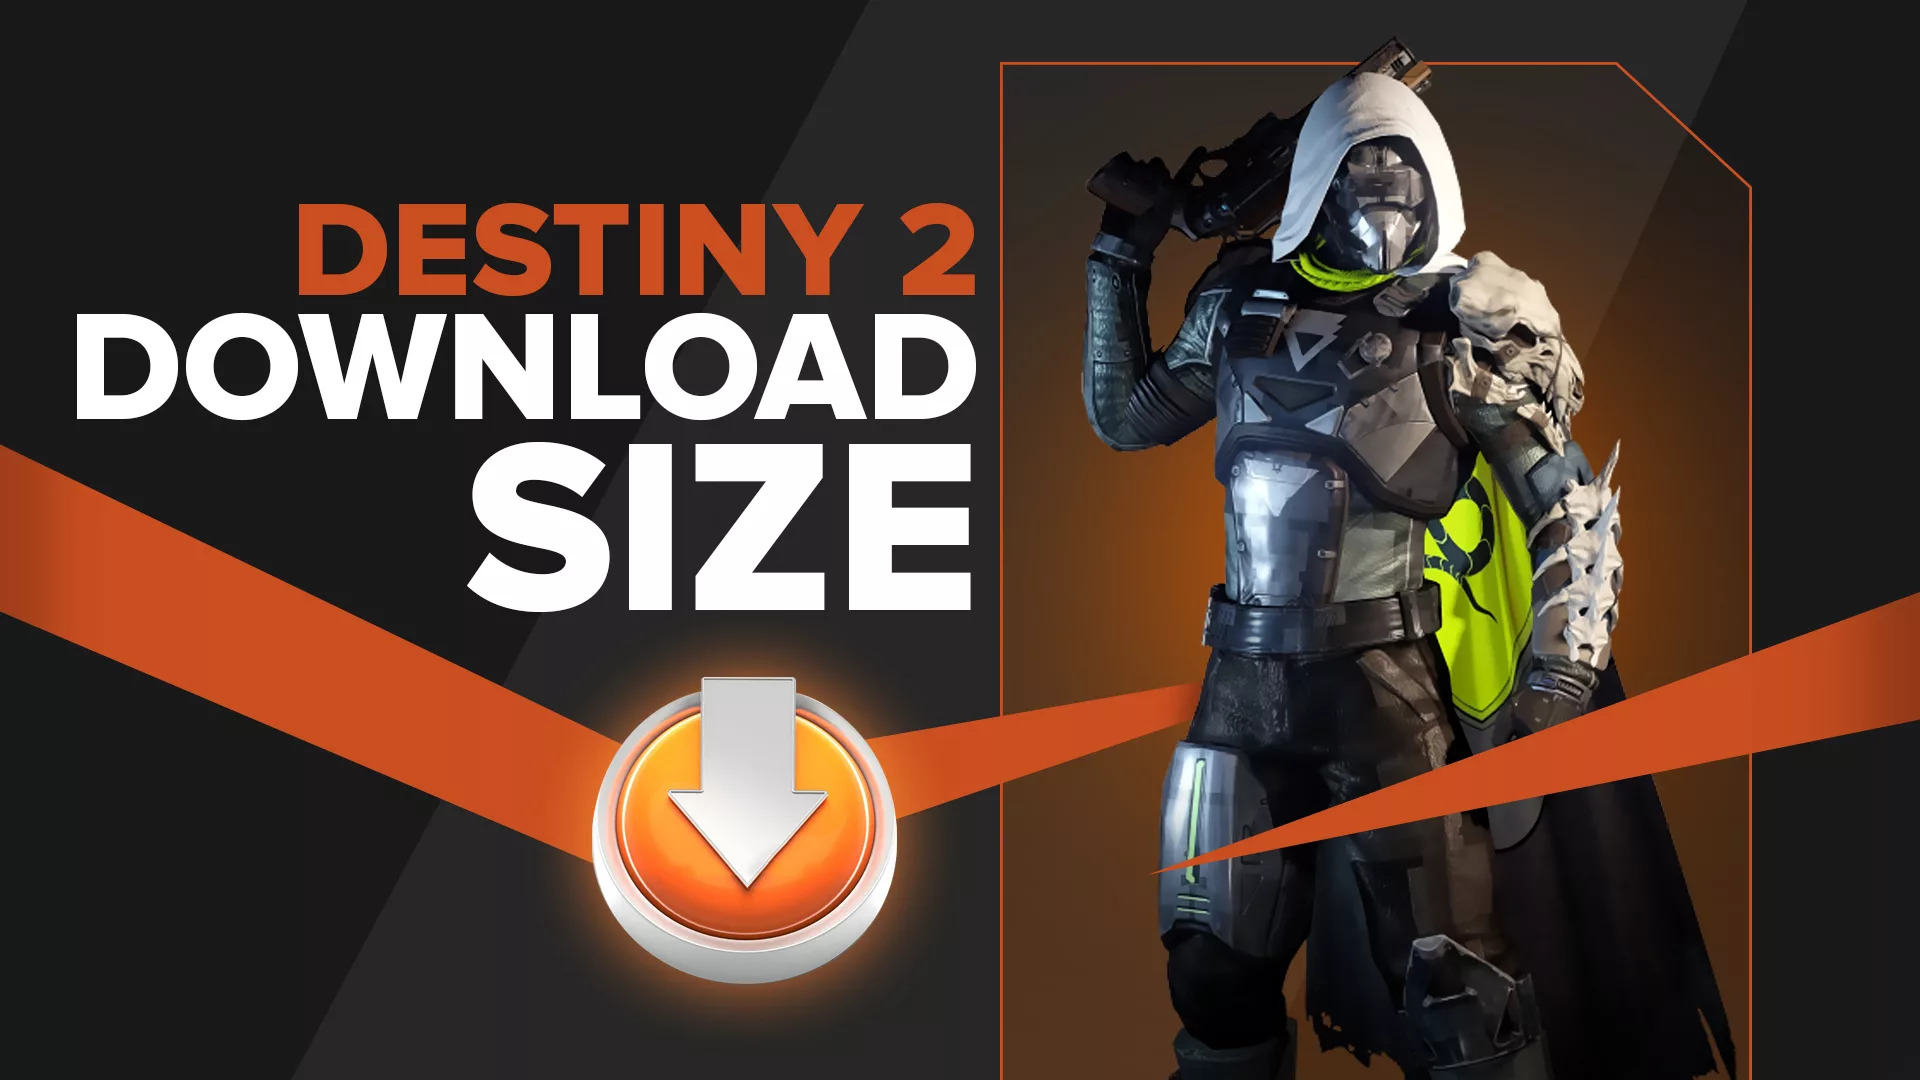 How Long Does Destiny 2 Take To Download